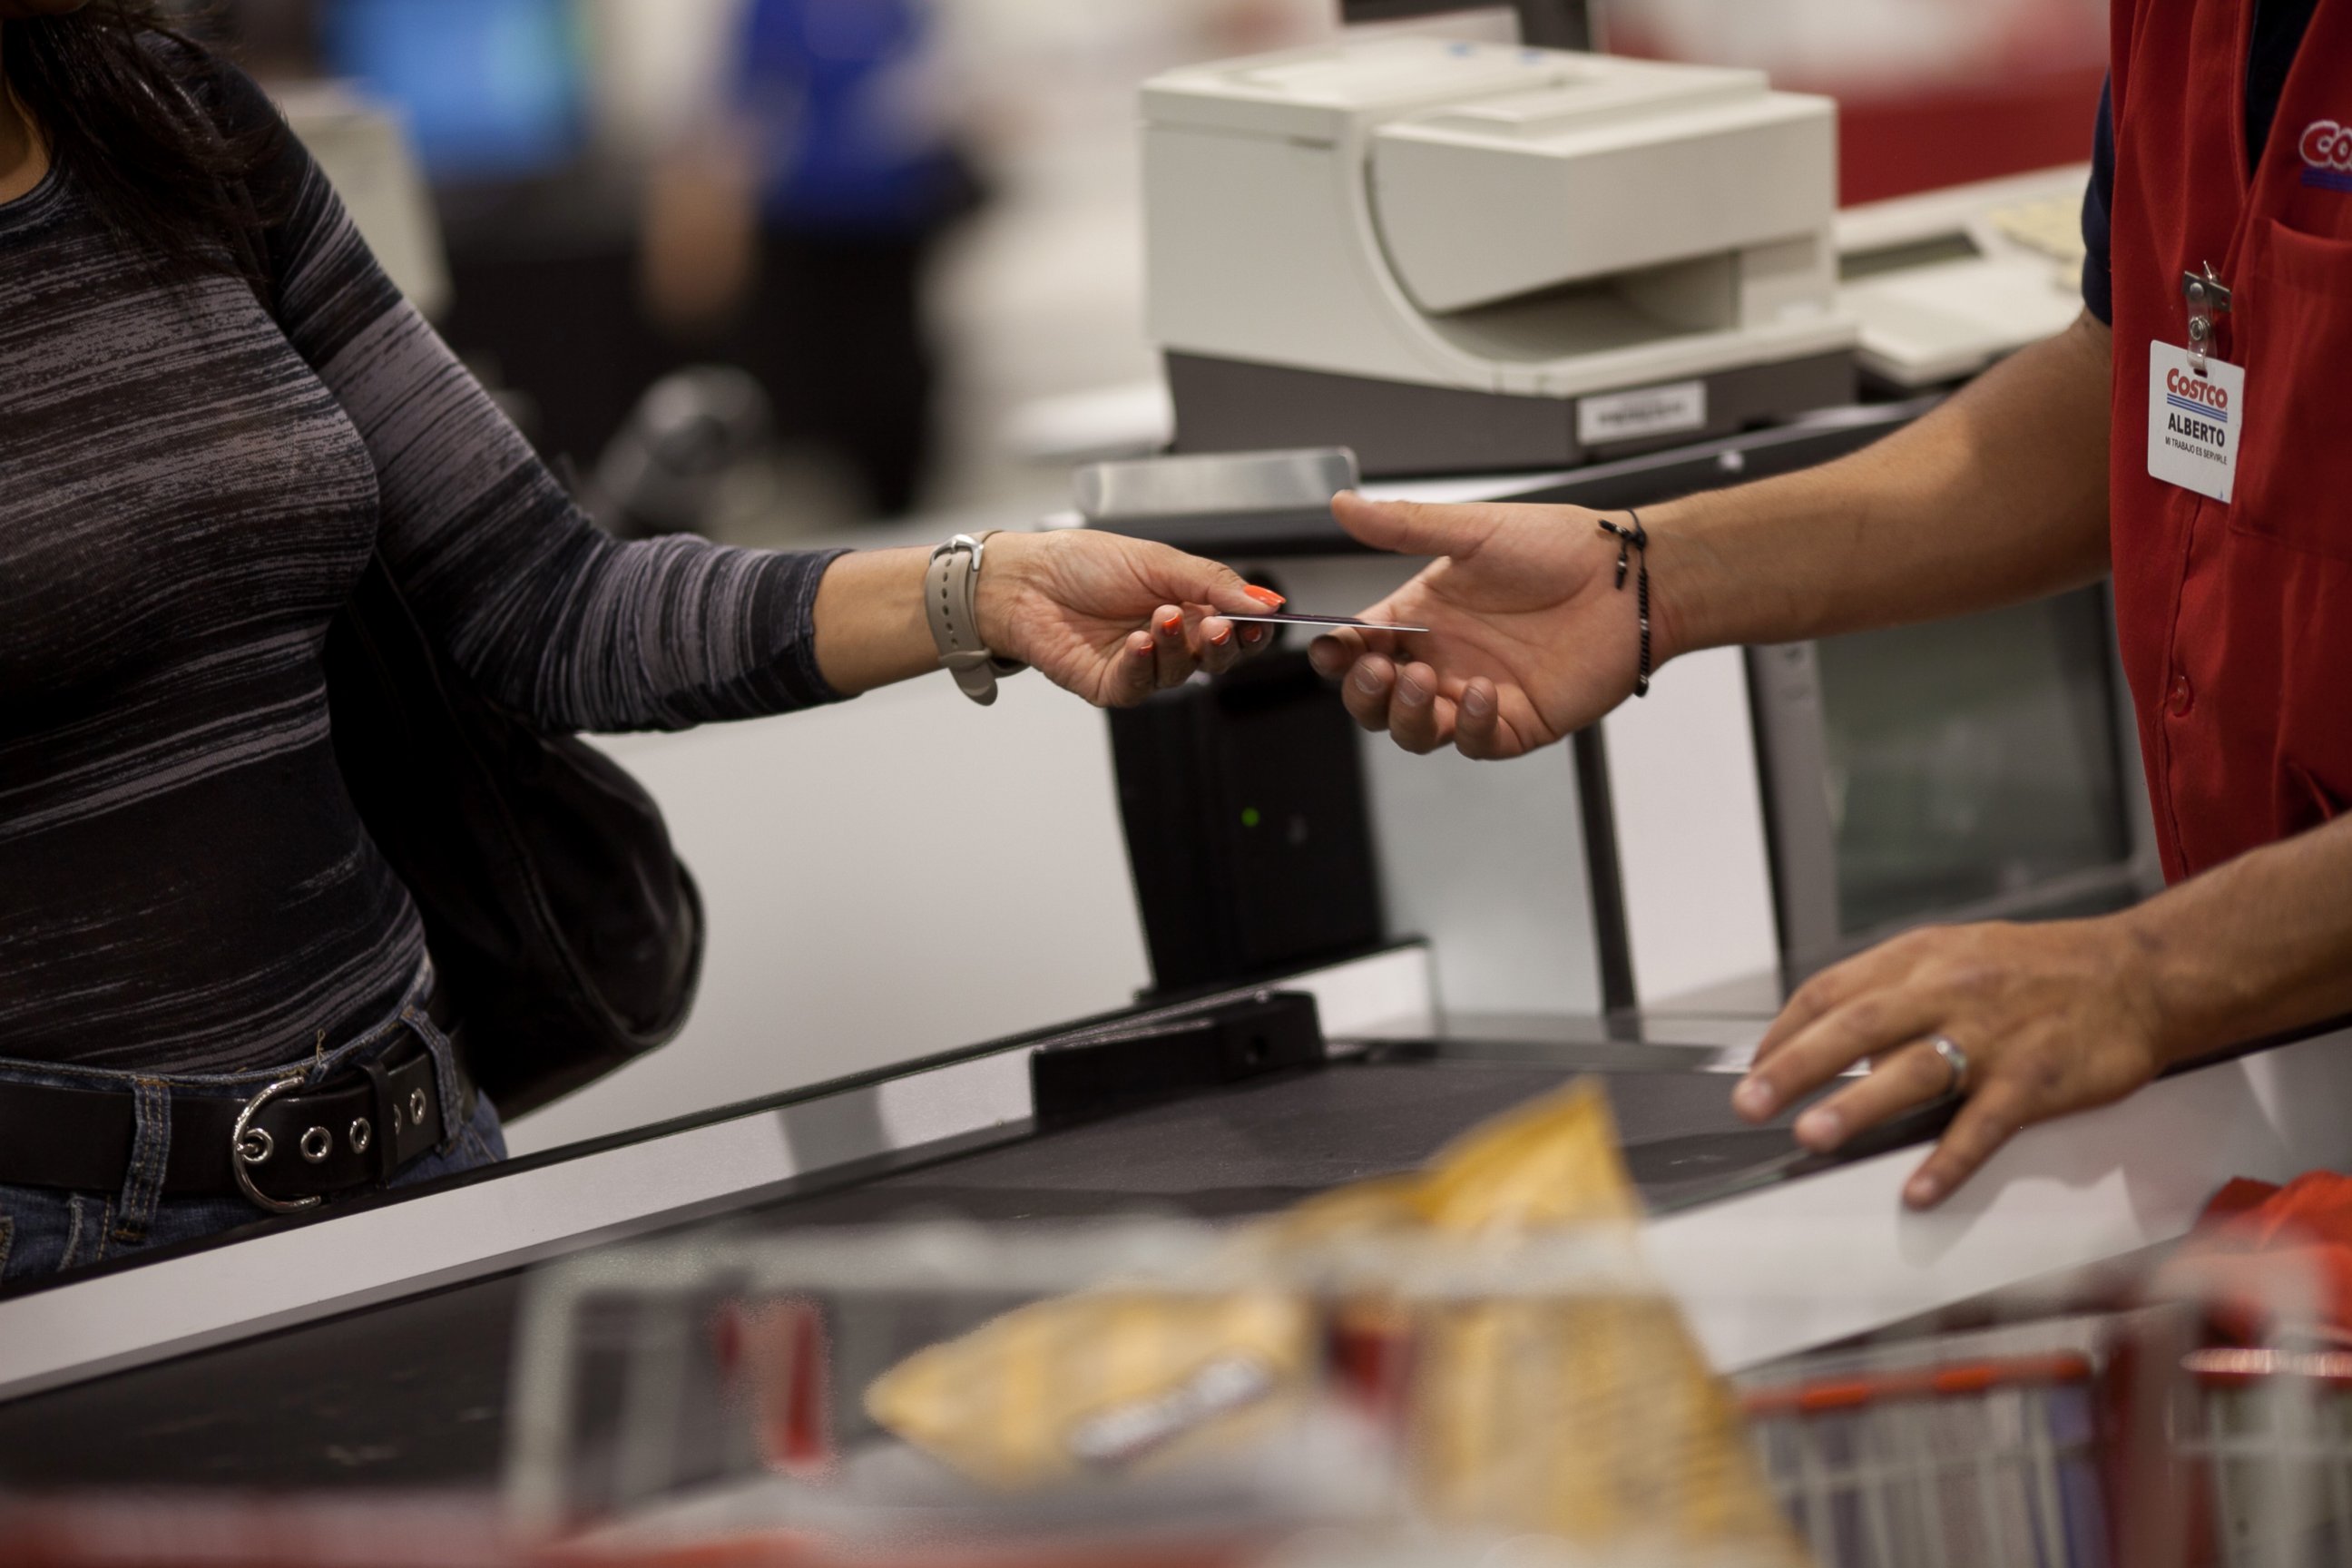 PHOTO: A customer hands the cashier her membership card to make purchases at the Costco outside of Mexico City on May 21, 2012.